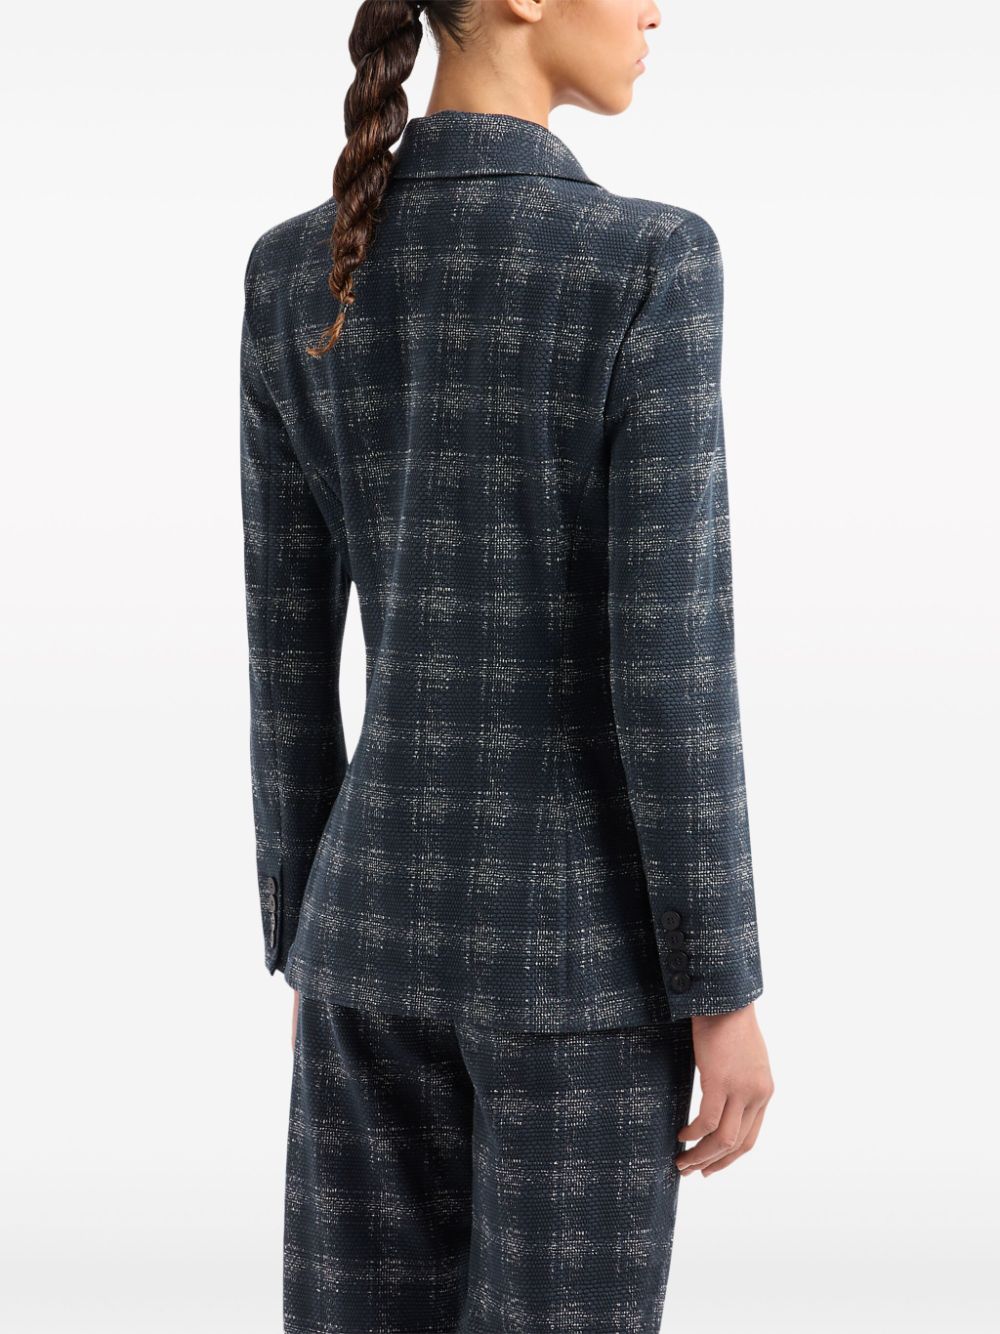 EMPORIO ARMANI Navy Blue Stretch Blazer Jacket with Check Pattern and Notched Lapels for Women